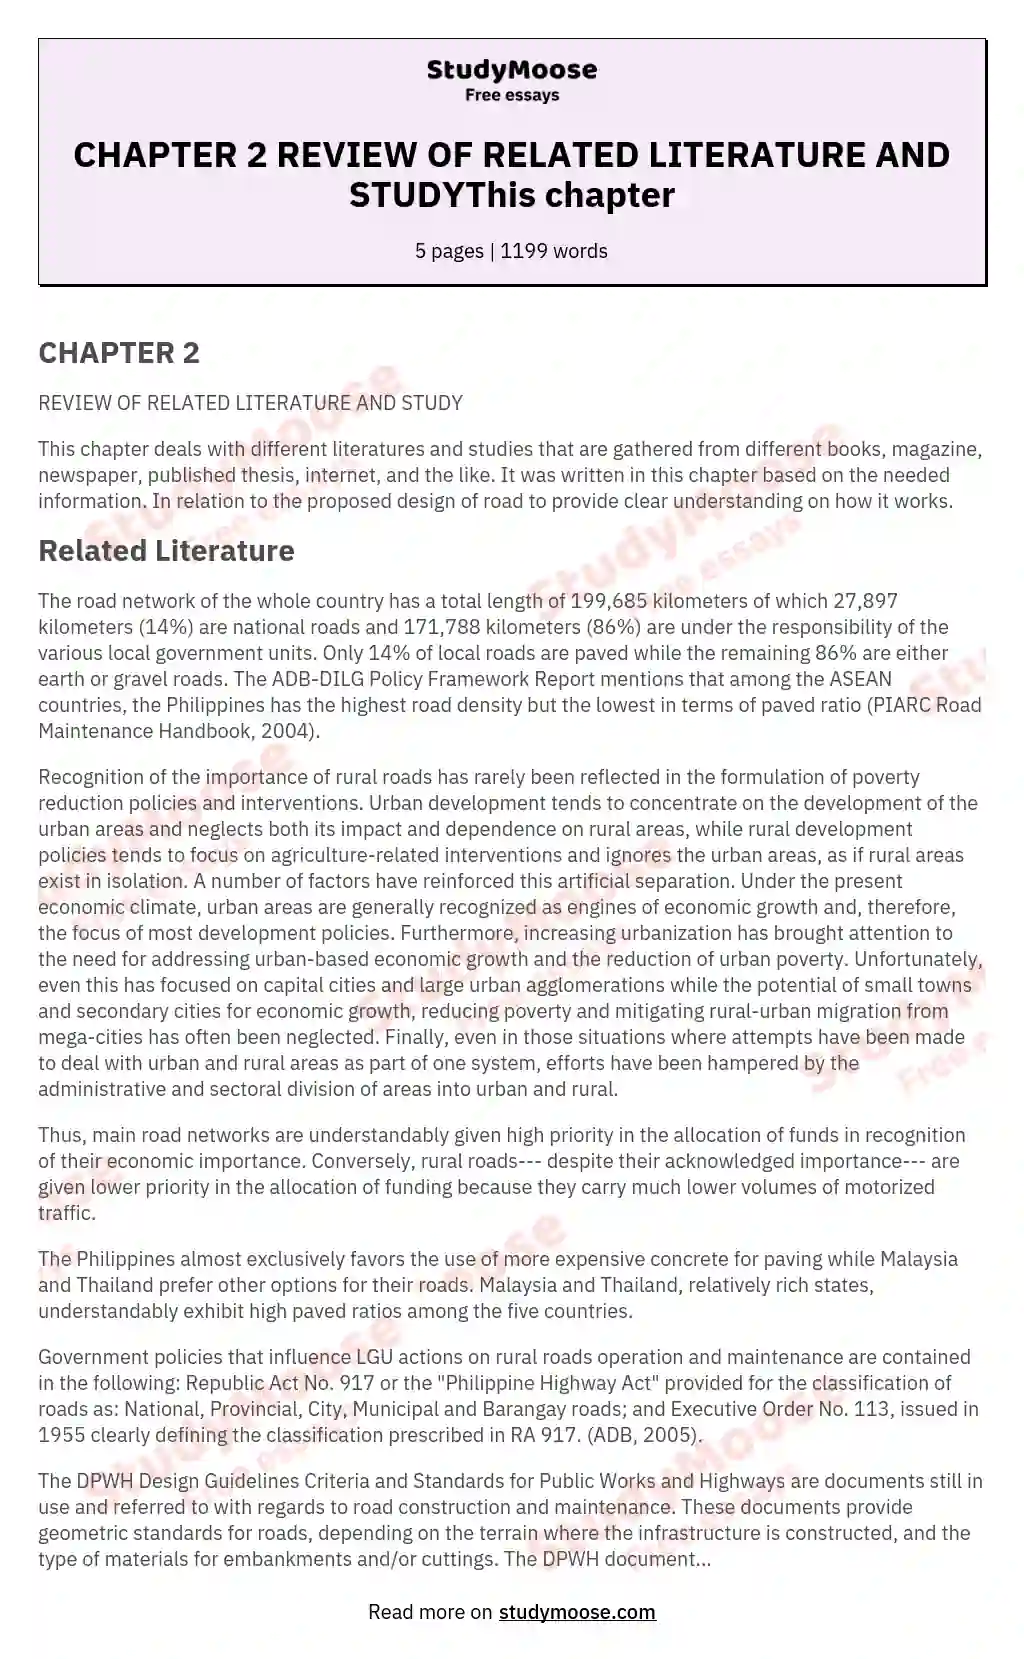 CHAPTER 2 REVIEW OF RELATED LITERATURE AND STUDYThis chapter essay